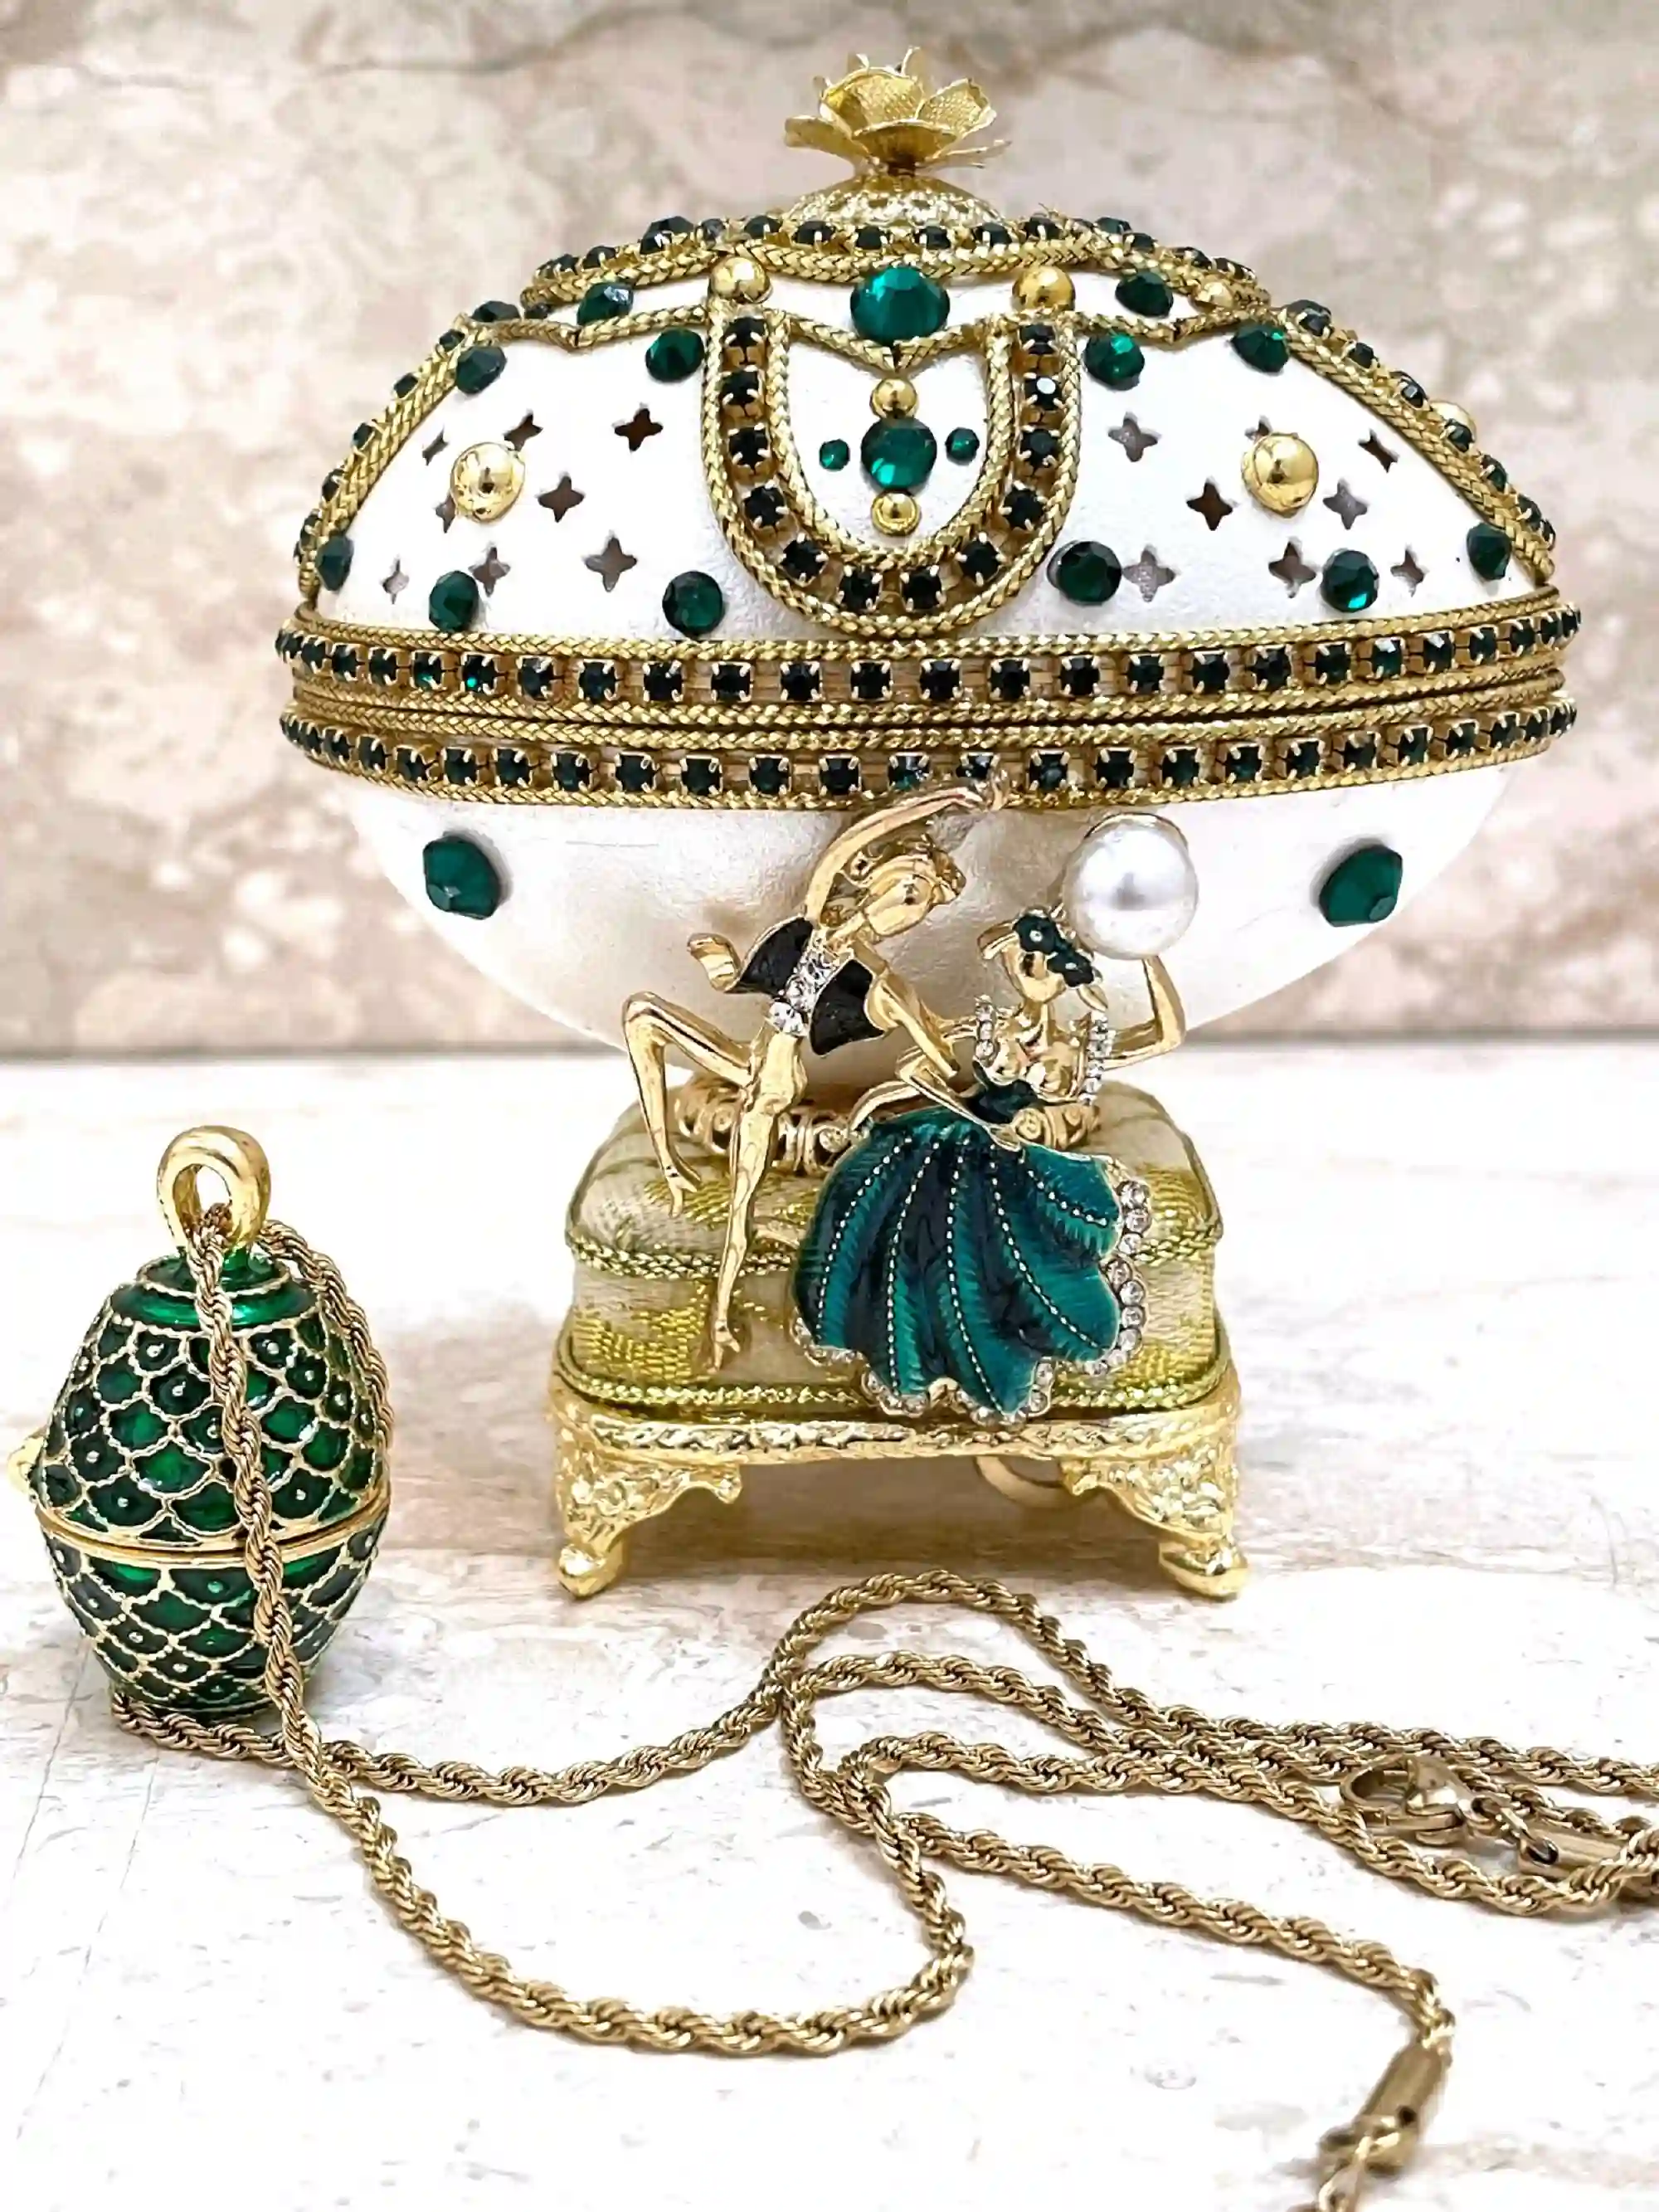 ONE ONLY, Faberge Egg Ornament, Couple Gift for Wedding, Present for wife, Birthday Gift for her, Marriage Anniversary, Faberge egg, 24kGOLD 